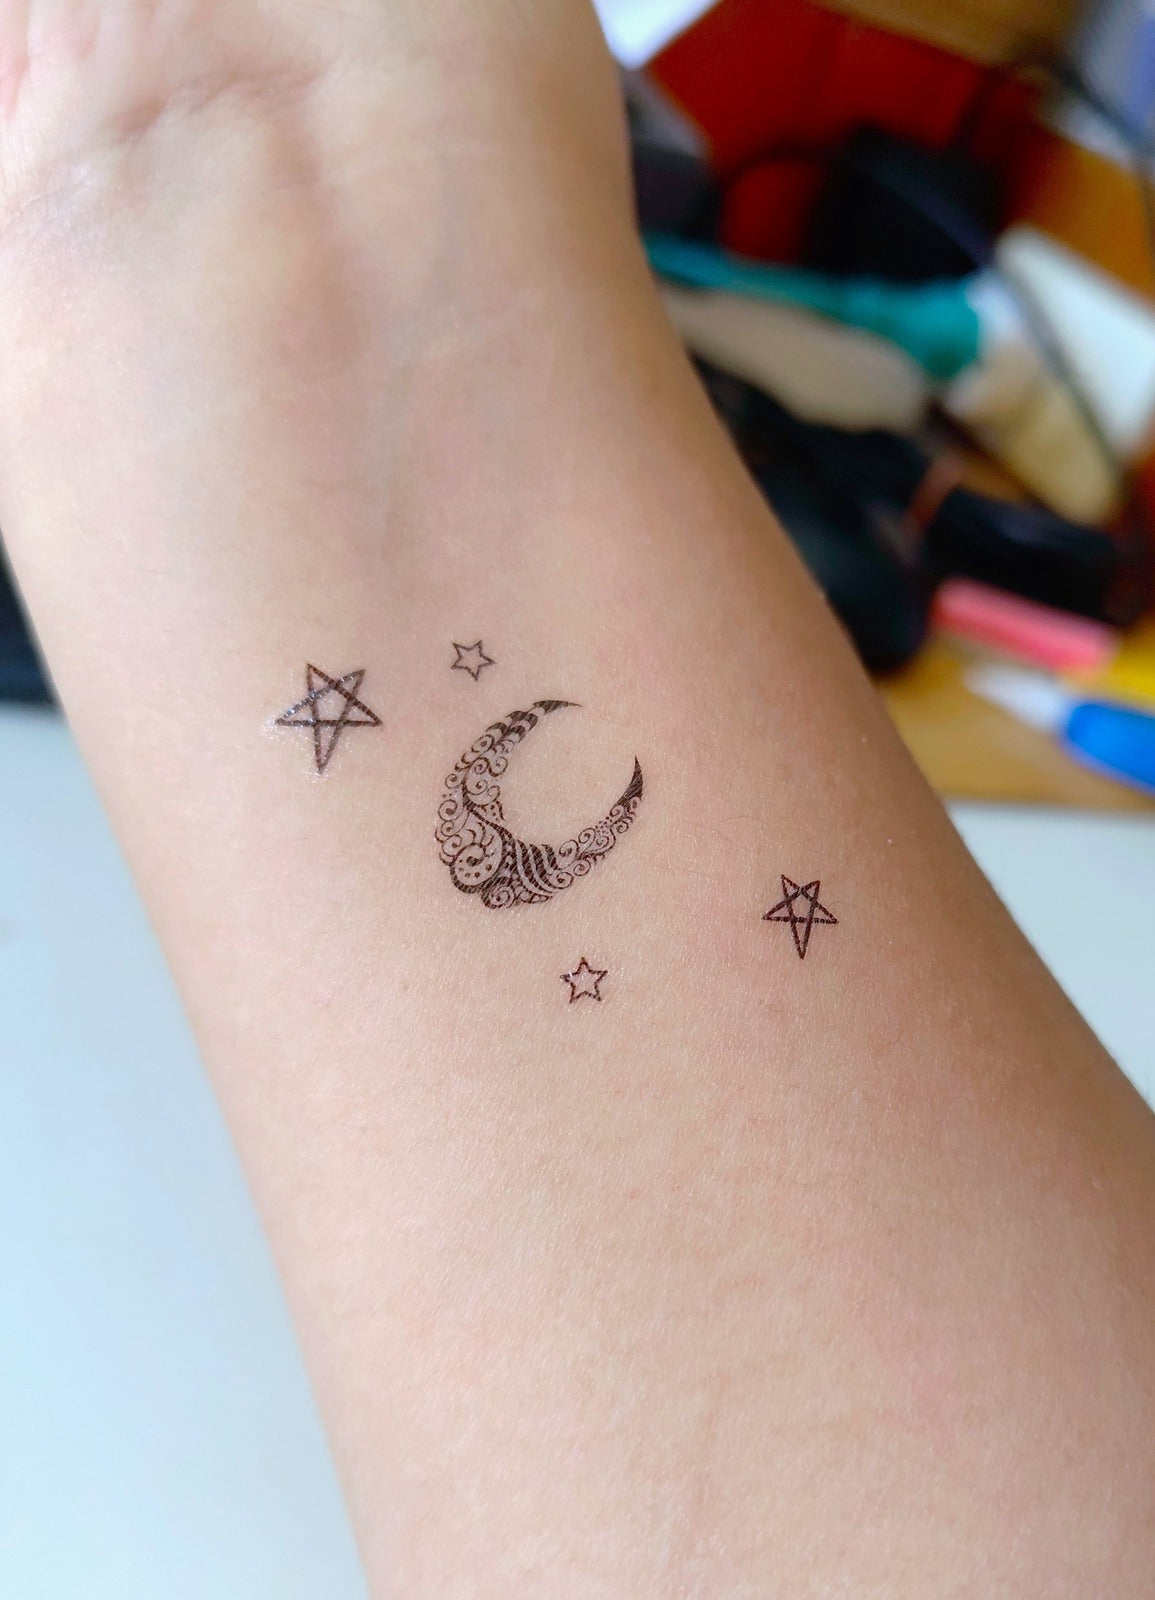 25 Best Fish And Constellation Tattoos For Pisces Zodiac Sign | YourTango